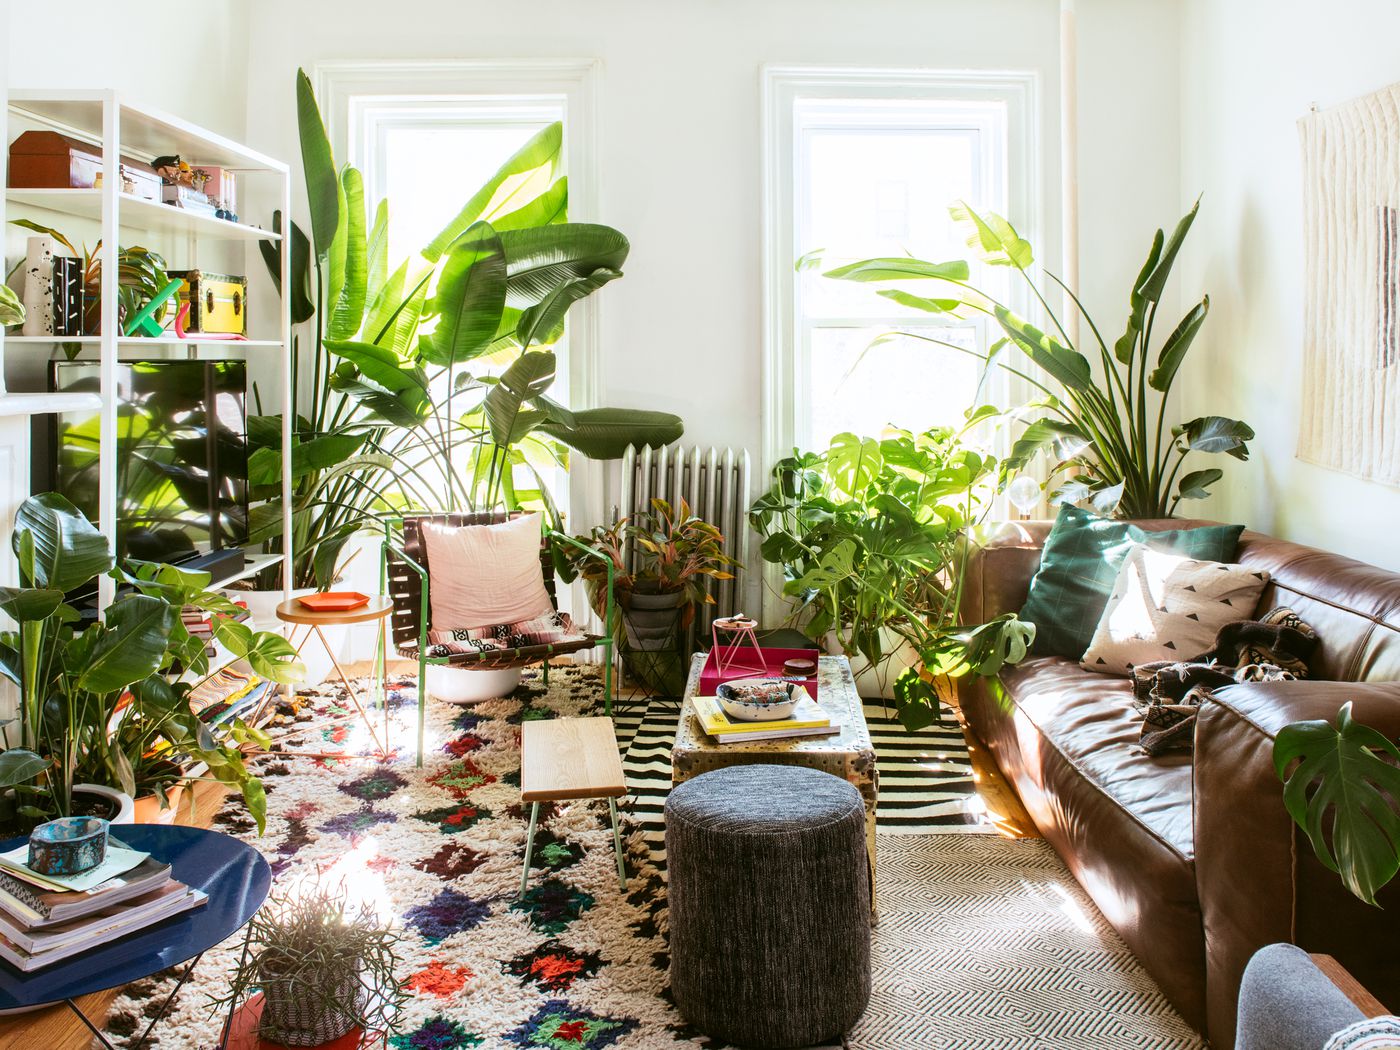 Living Room Decor Ideas With Plants